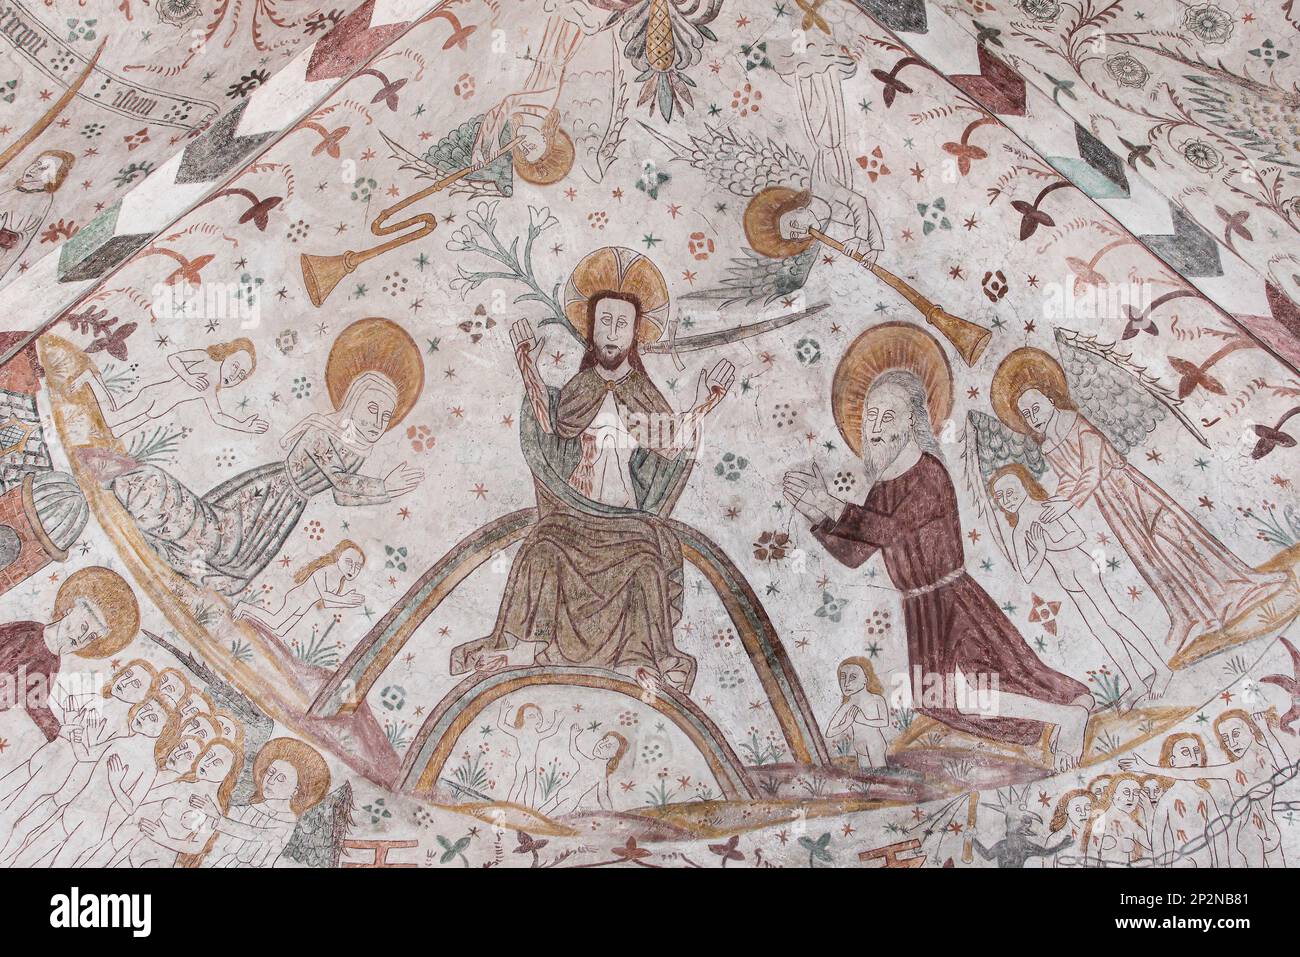 on the judgment day Christ stits on the rainbow, an 500 years old mural in Keldby Church, Denmark, October 10, 2022 Stock Photo